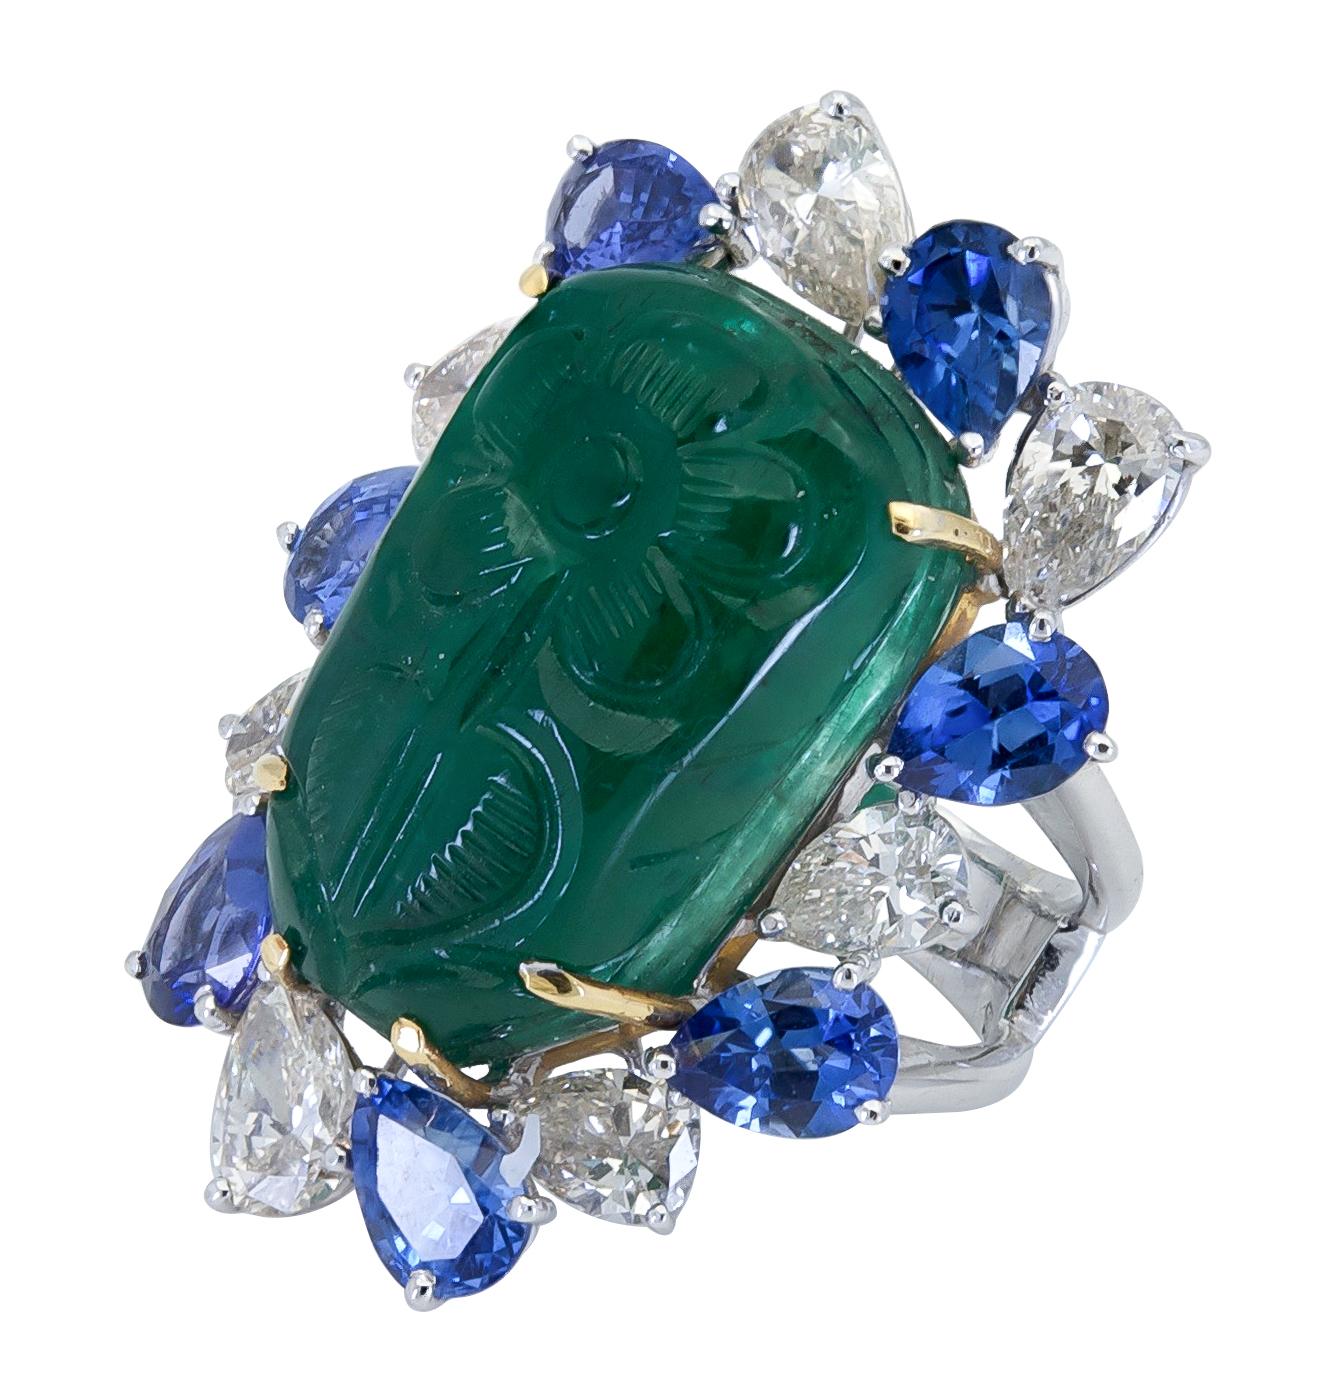 A unique cocktail ring showcasing a large green emerald carved with a potted flower. Surrounding the emerald are alternating pear shape blue sapphires and diamonds set in a polished mounting. 
Green emerald weighs 29.16 carats.
Blue sapphires weigh